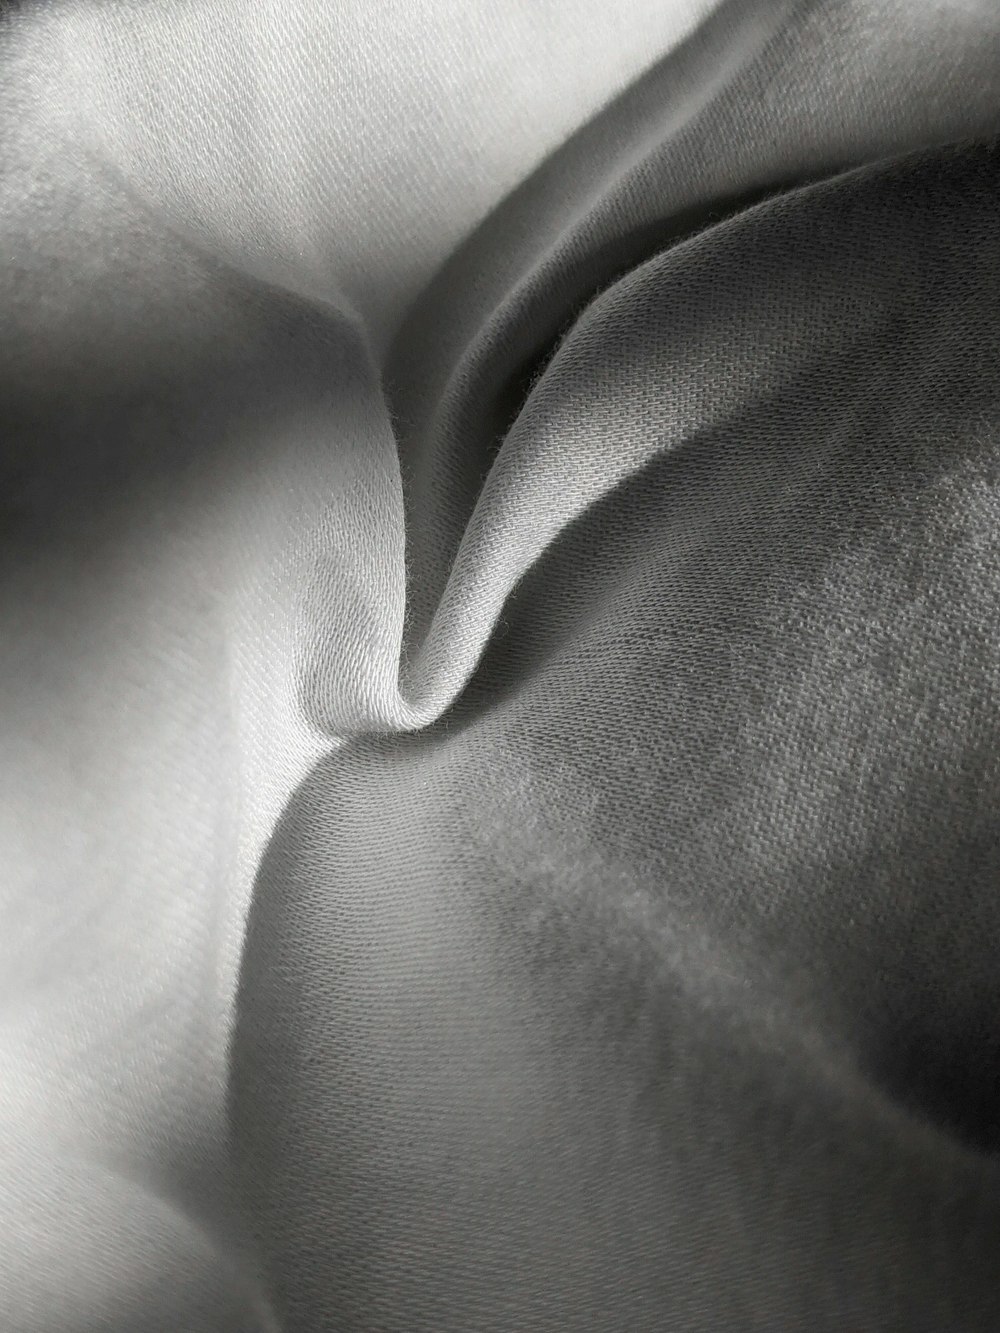 gray textile in close up image